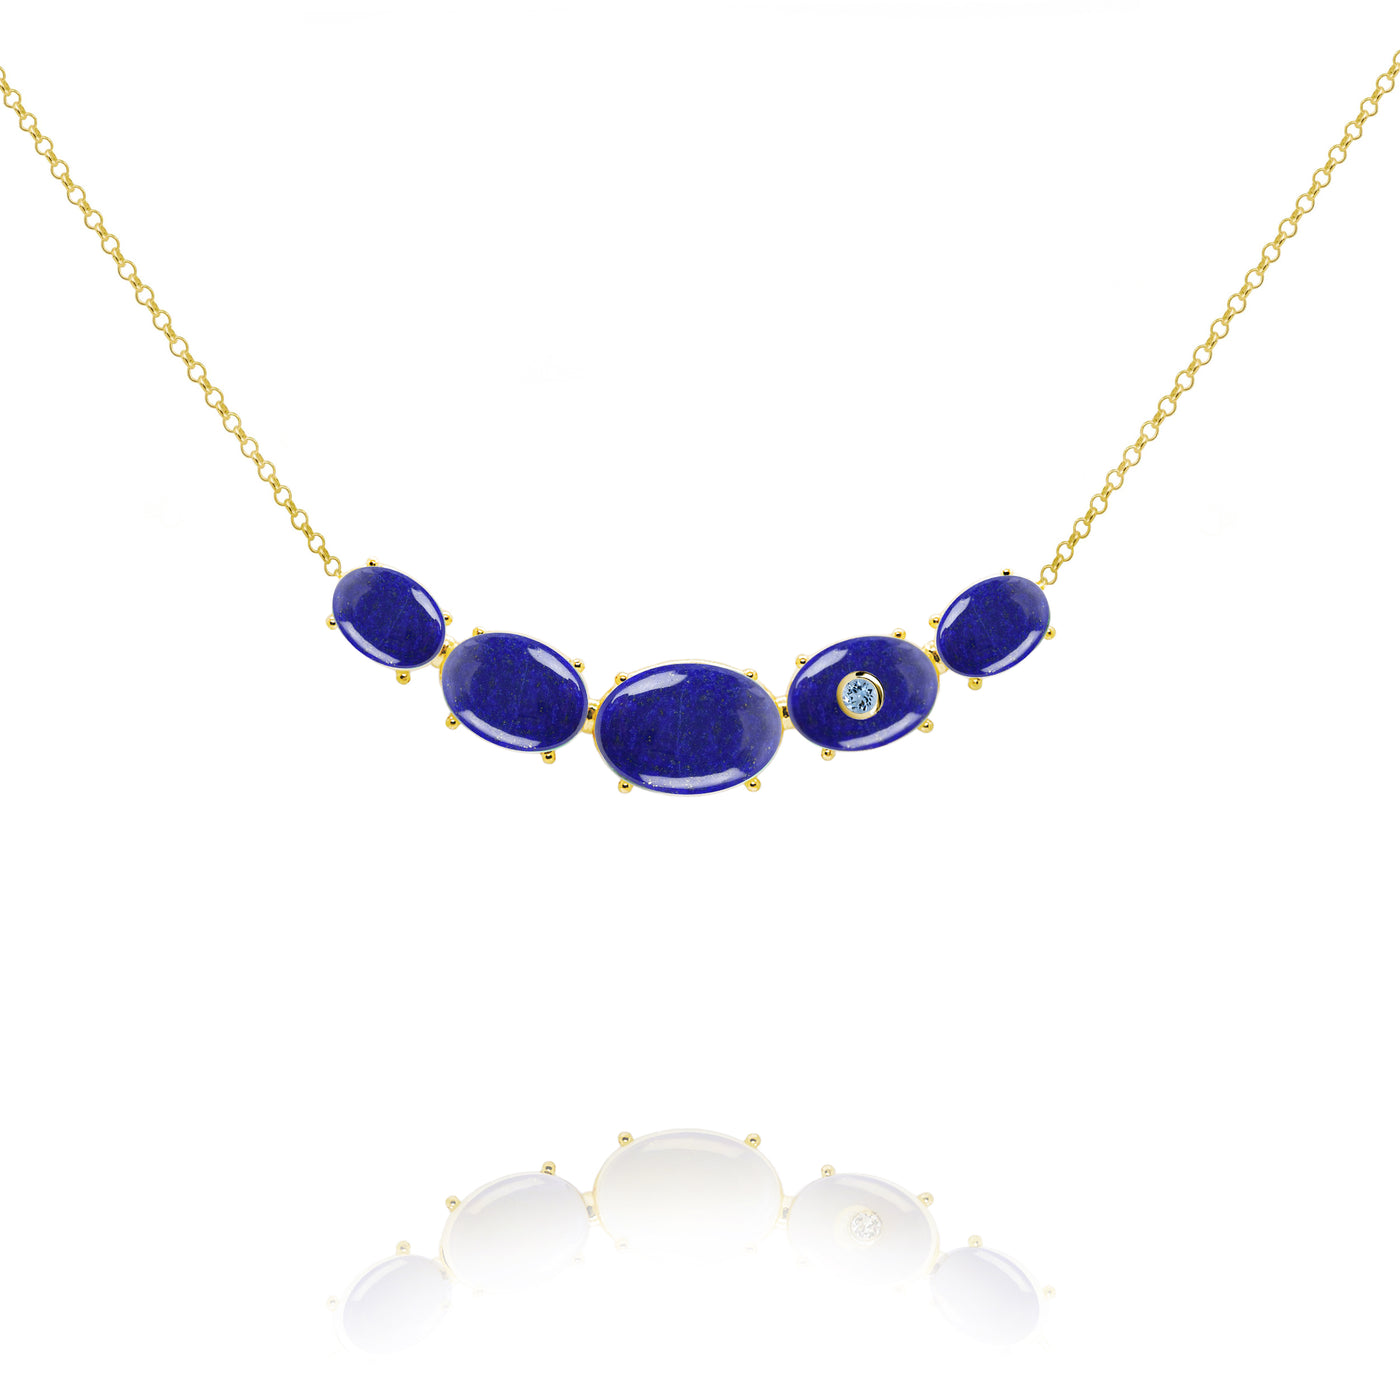 fine jewelry necklace in gold with blue lapis lazuli and blue aquamarine gemstones from Atelier ORMAN